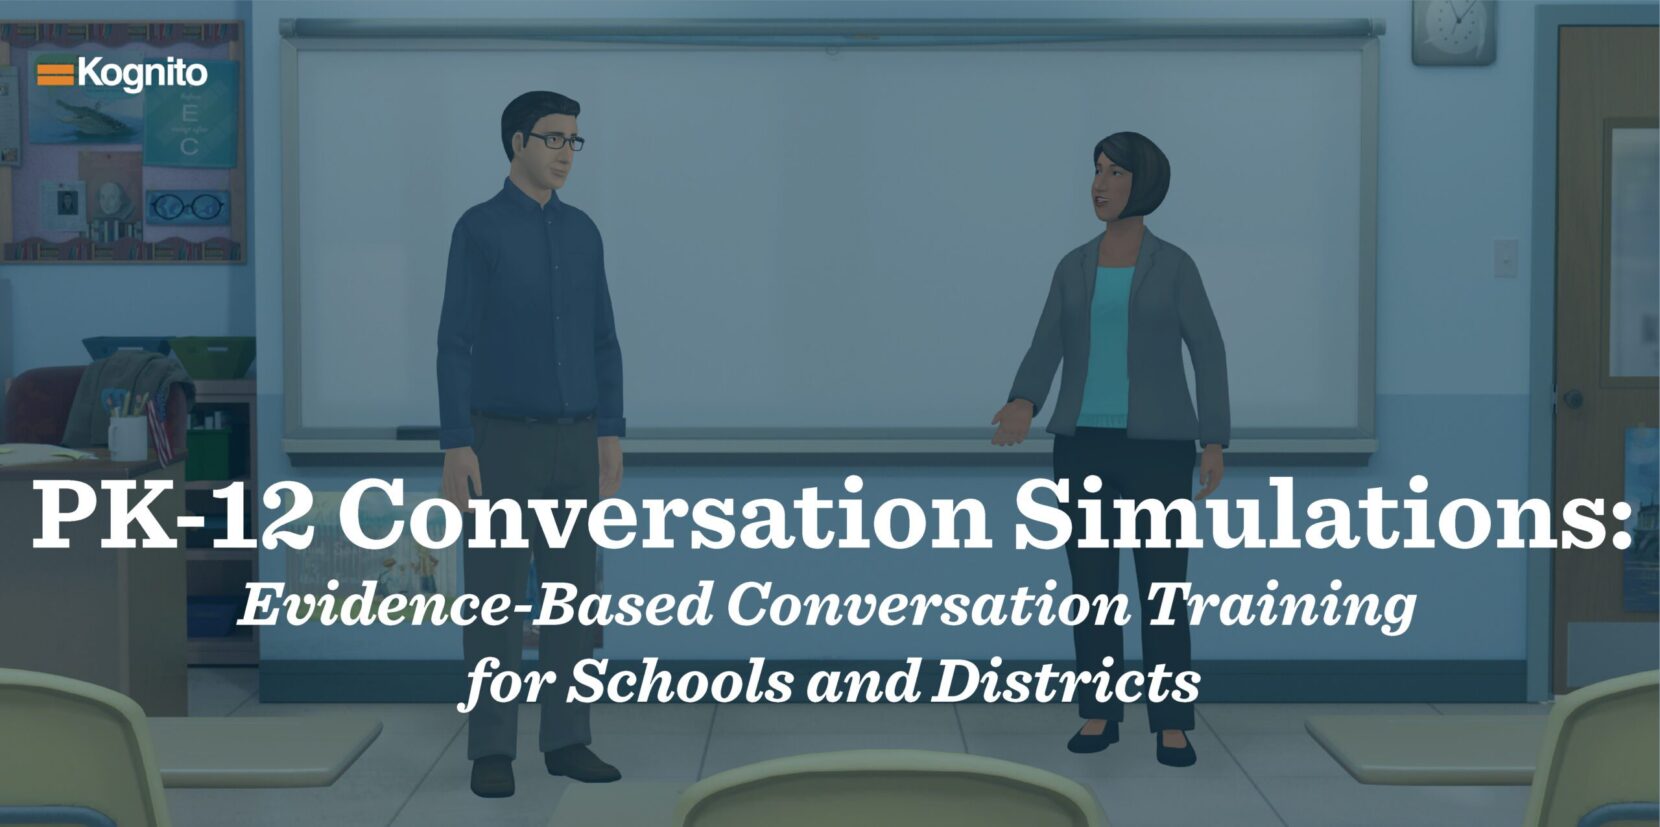 PK-12 Conversation Simulations: Evidence-Based Conversation Training for Schools and Districts